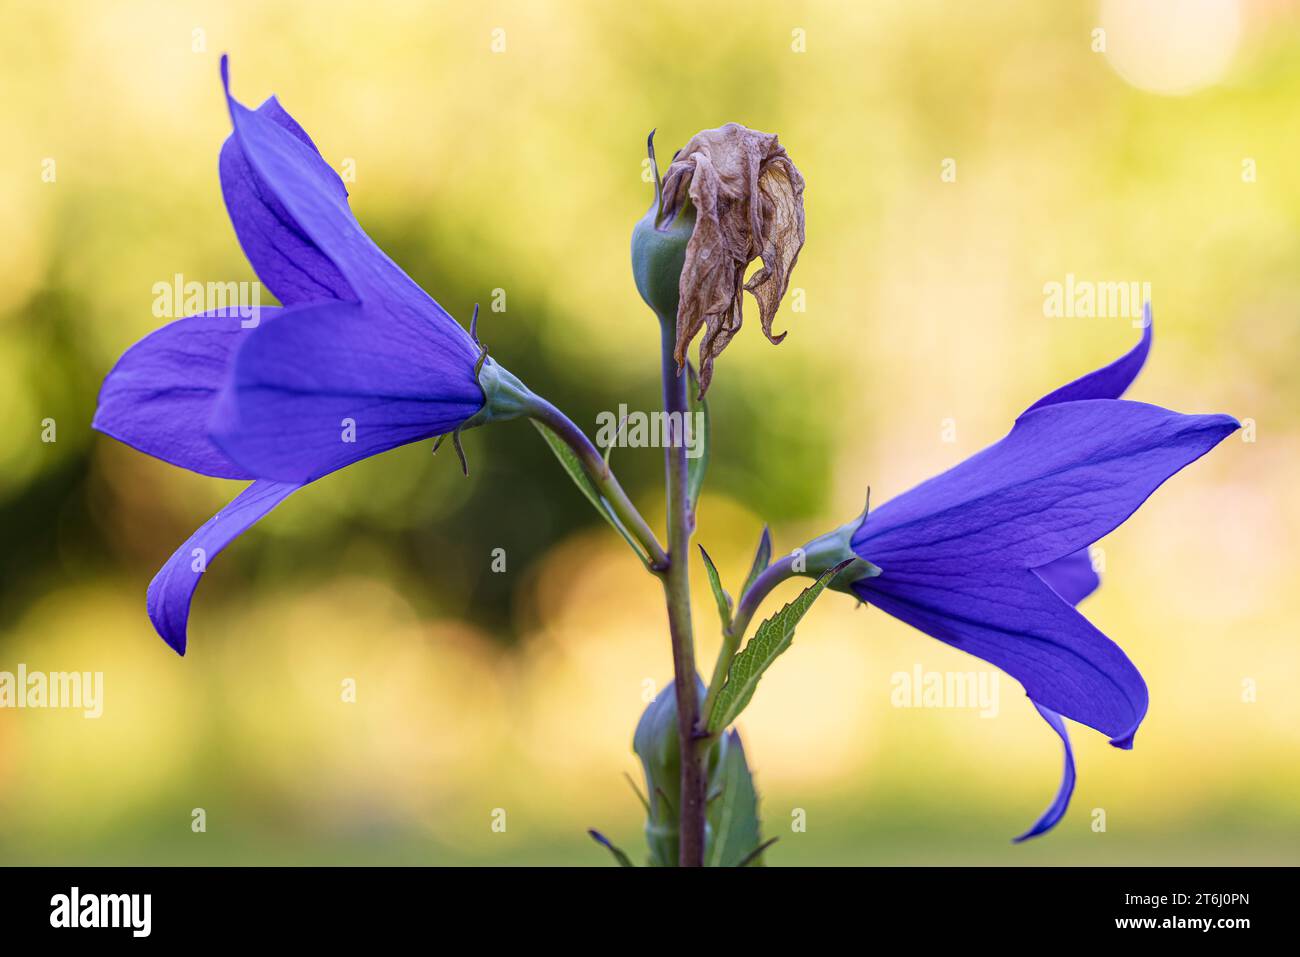 Peach-leaved bellflower, Campanula persicifolia, buds, faded flower, contrasting image Stock Photo